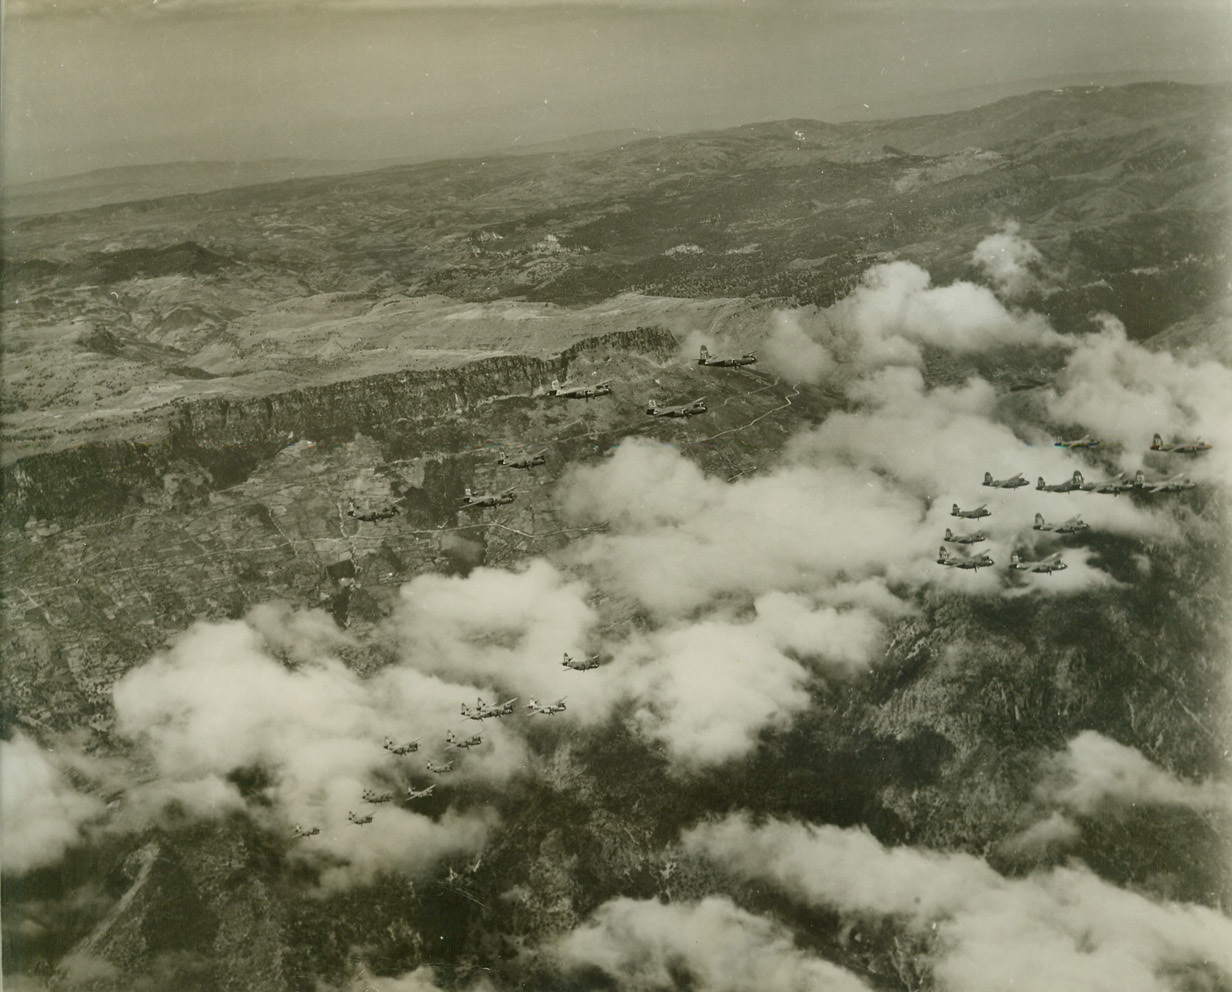 Air “Squeeze Play” on Axis, 4/24/1944. Sardinia – Hitler’s “Festung Europa” today, is being shattered and rocked by the greatest concentration of aerial might the world has ever seen. Day after day, in mounting numbers and with ever-increasing ferocity, huge masses of Allied bombers and fighters are blasting German war plants, communications, and airfields into crumbling and smoking ruin in preparation for “D-Day” – and Allied invasion. These aerial armadas have occupied Europe in a gigantic pincers, with one “leg” in England, and the other in Italy and Sardinia. This series of photos shows U.S. B-26 Marauders taking off and operating from Allied fields in Sardinia, against the Southern Coast of France. Their target was the Var River railroad bridge near Nice. ---Here, the Marauders approach their target in tight, compact groups. Credit: (ACME Photo by Charles Seawood for the War Picture Pool);